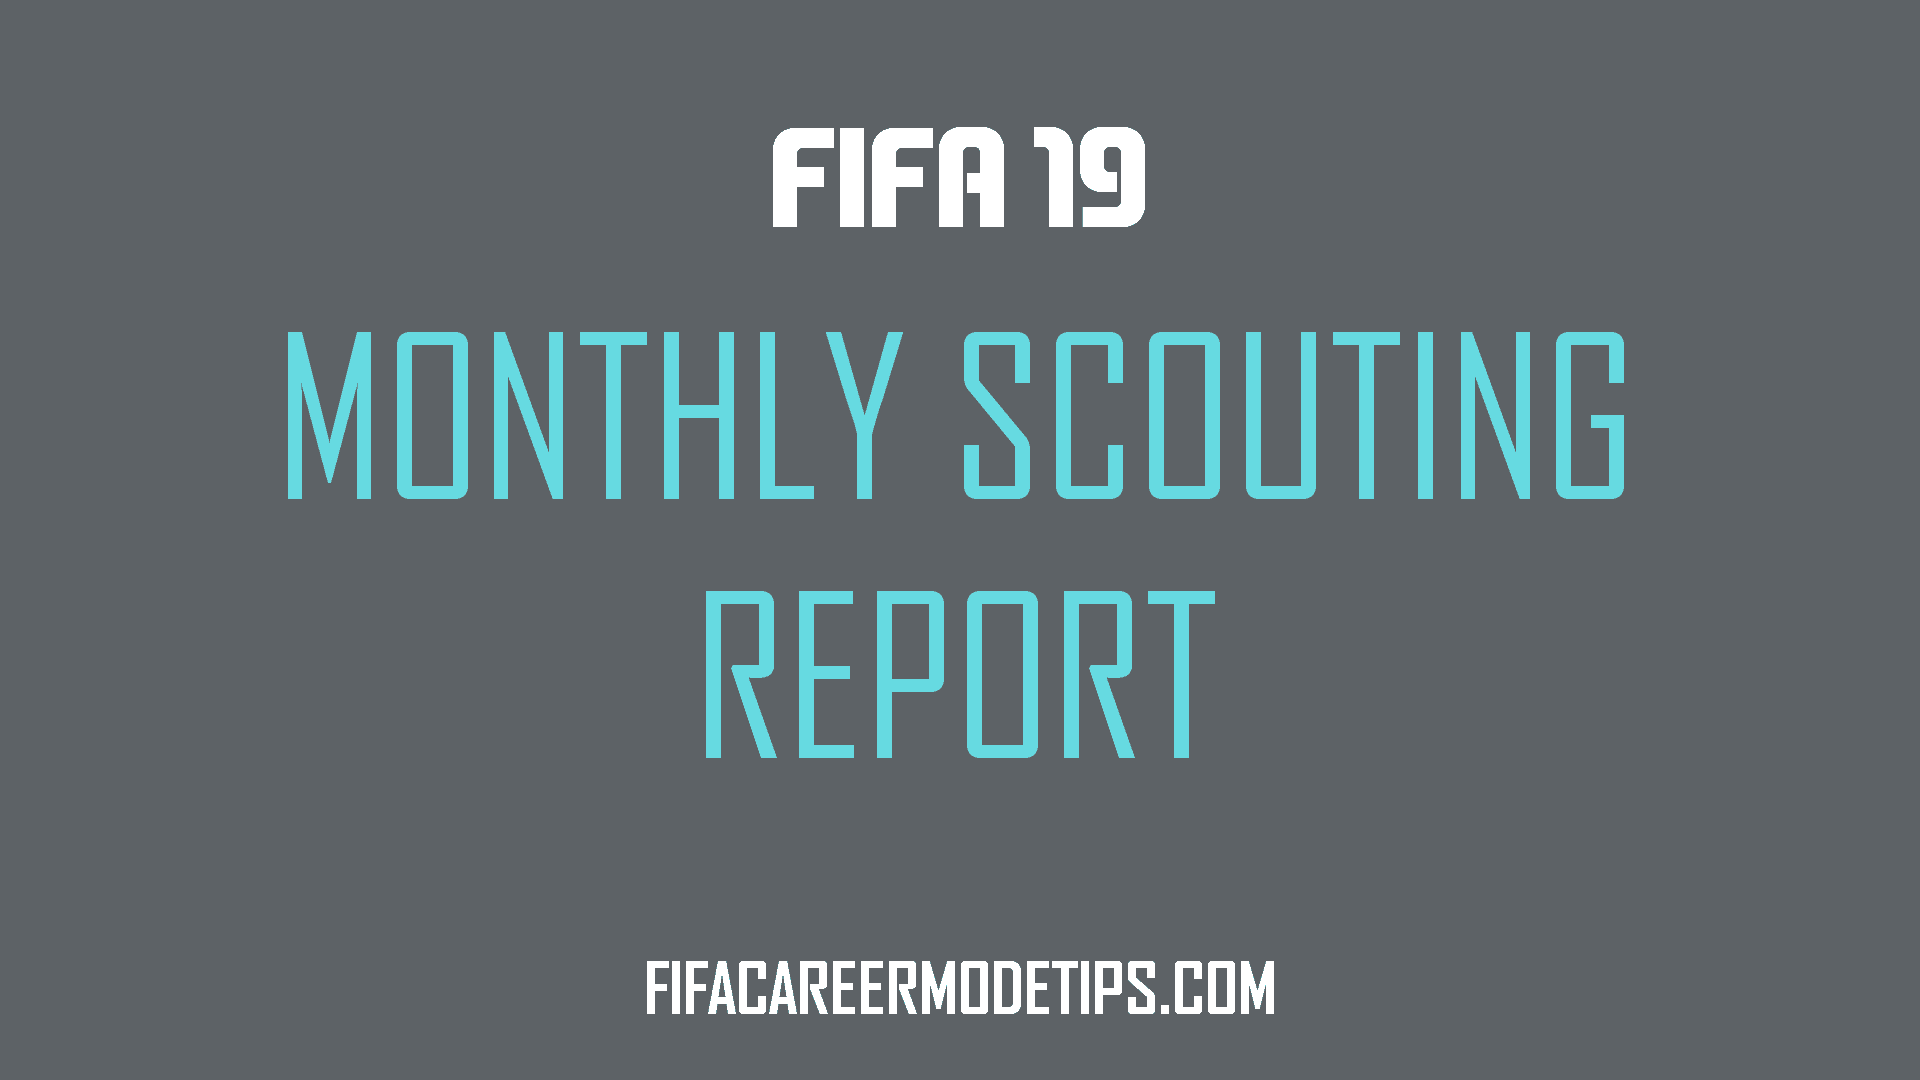 Monthly Scouting Report in FIFA 19